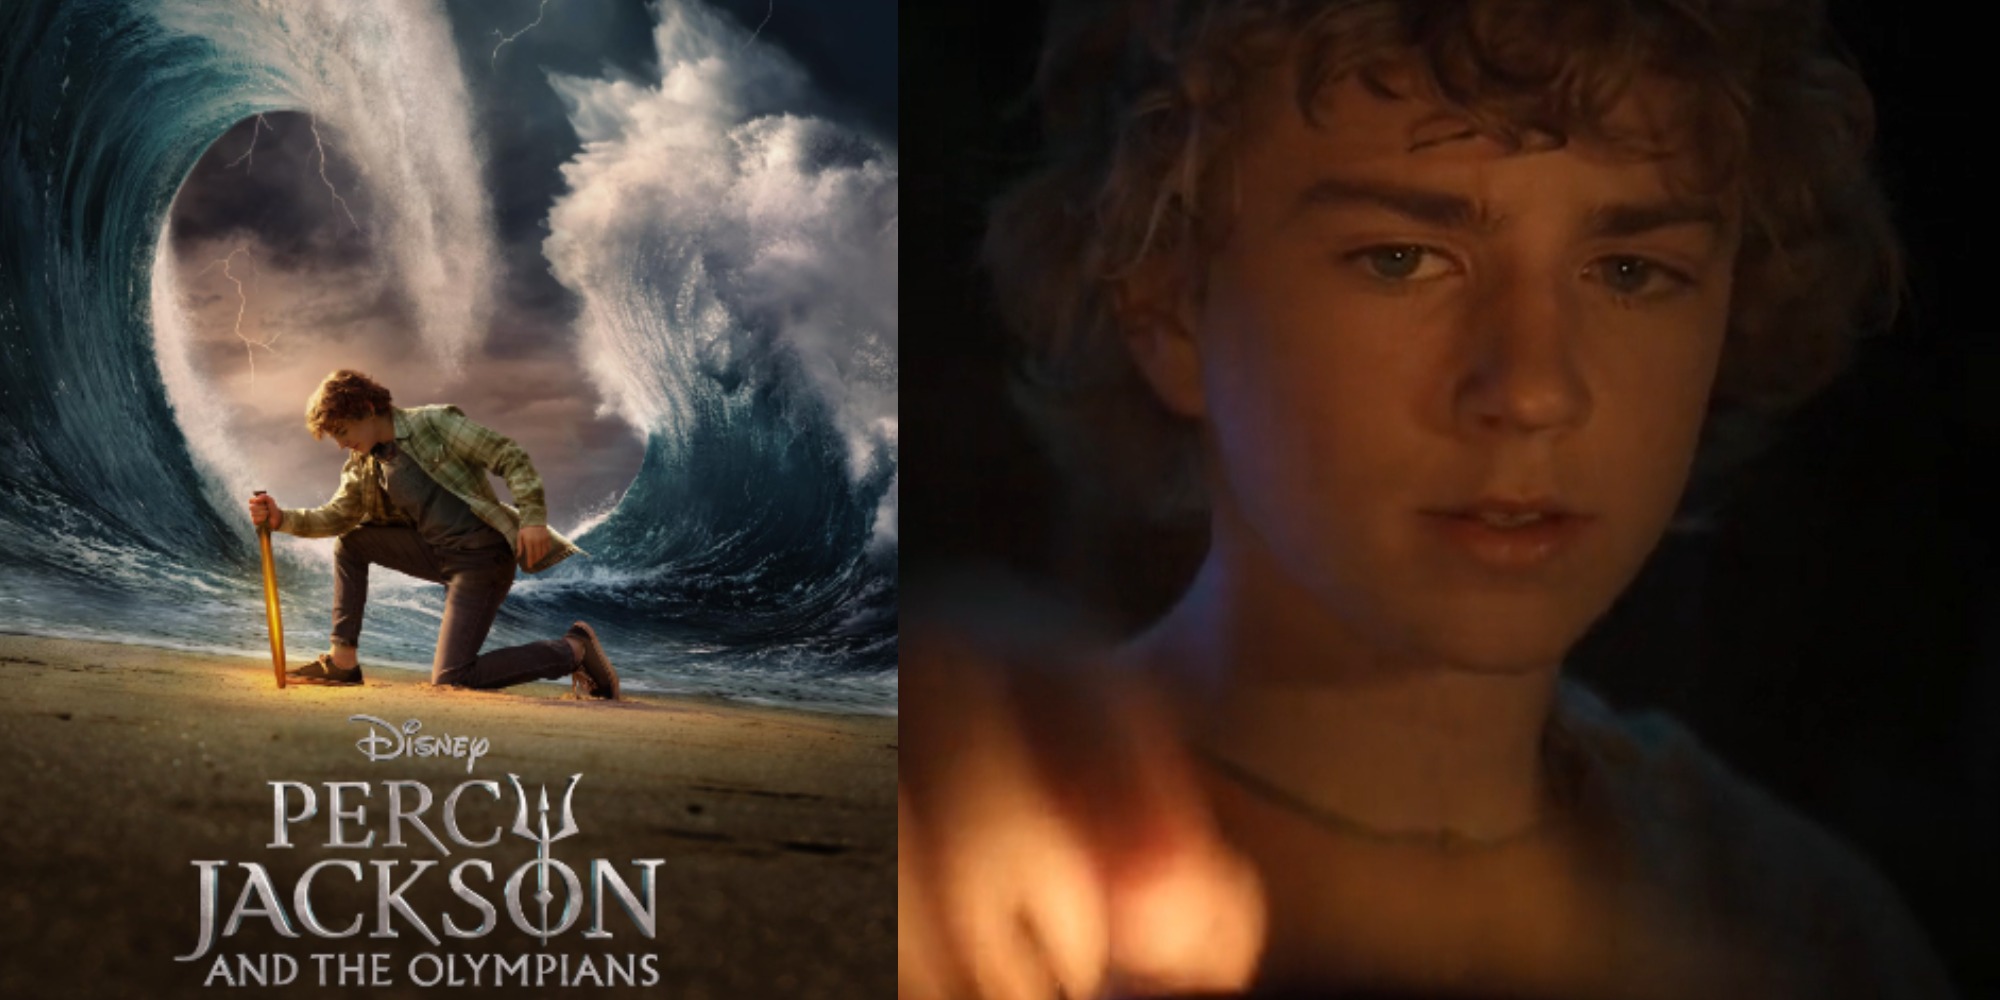 Percy Jackson And The Olympians Episode 3: Release Date, Spoilers & Recap